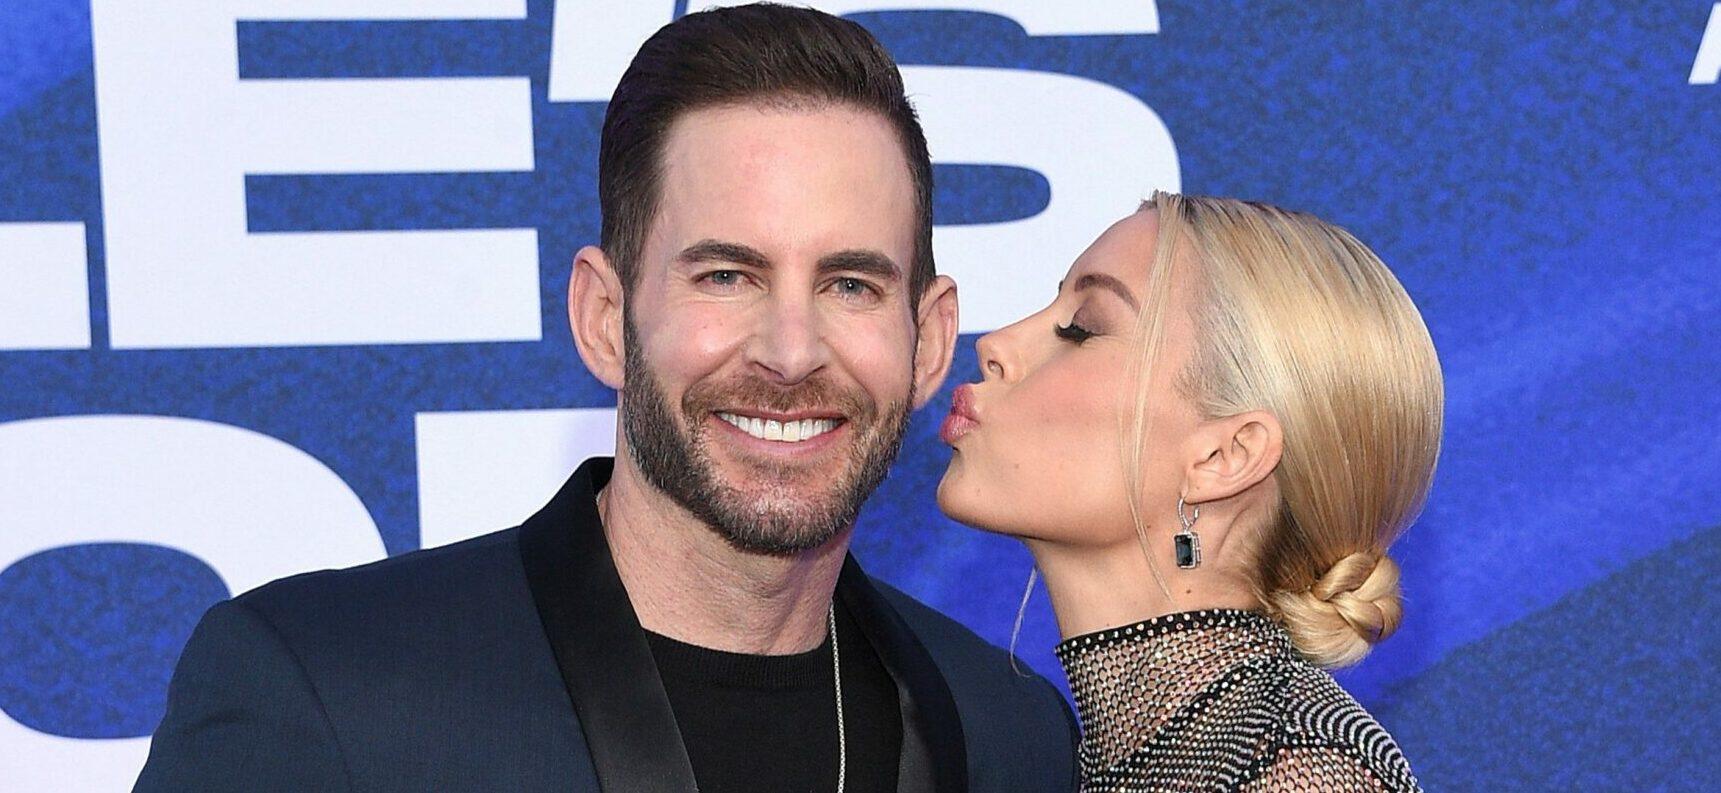 Heather Rae & Tarek El Moussa Welcome First Child Together!